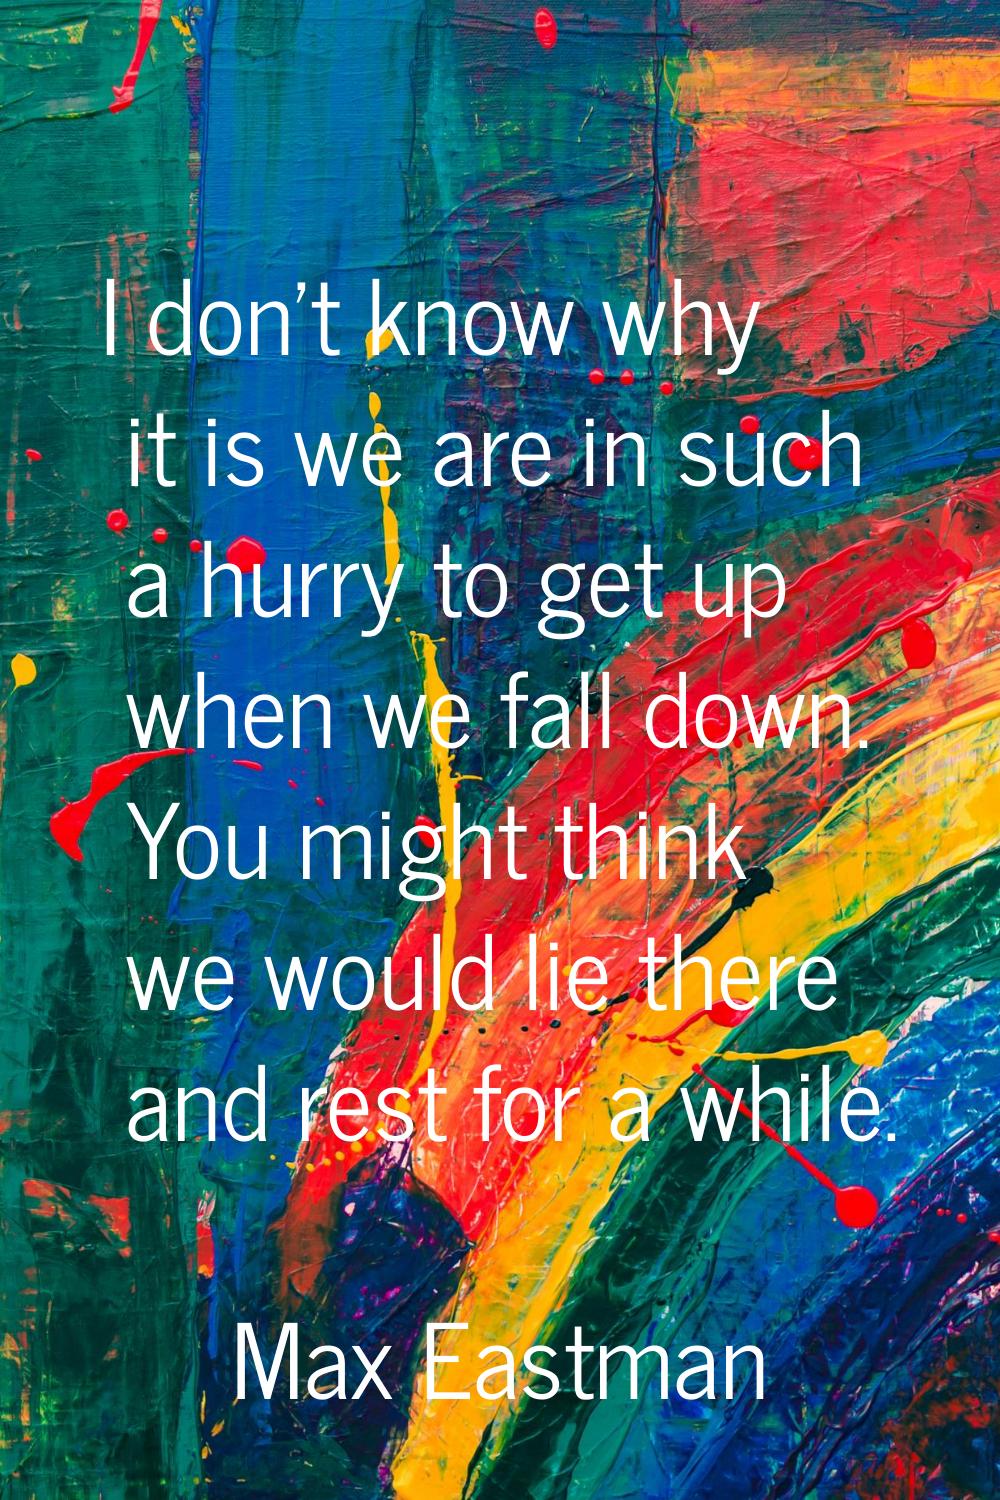 I don't know why it is we are in such a hurry to get up when we fall down. You might think we would